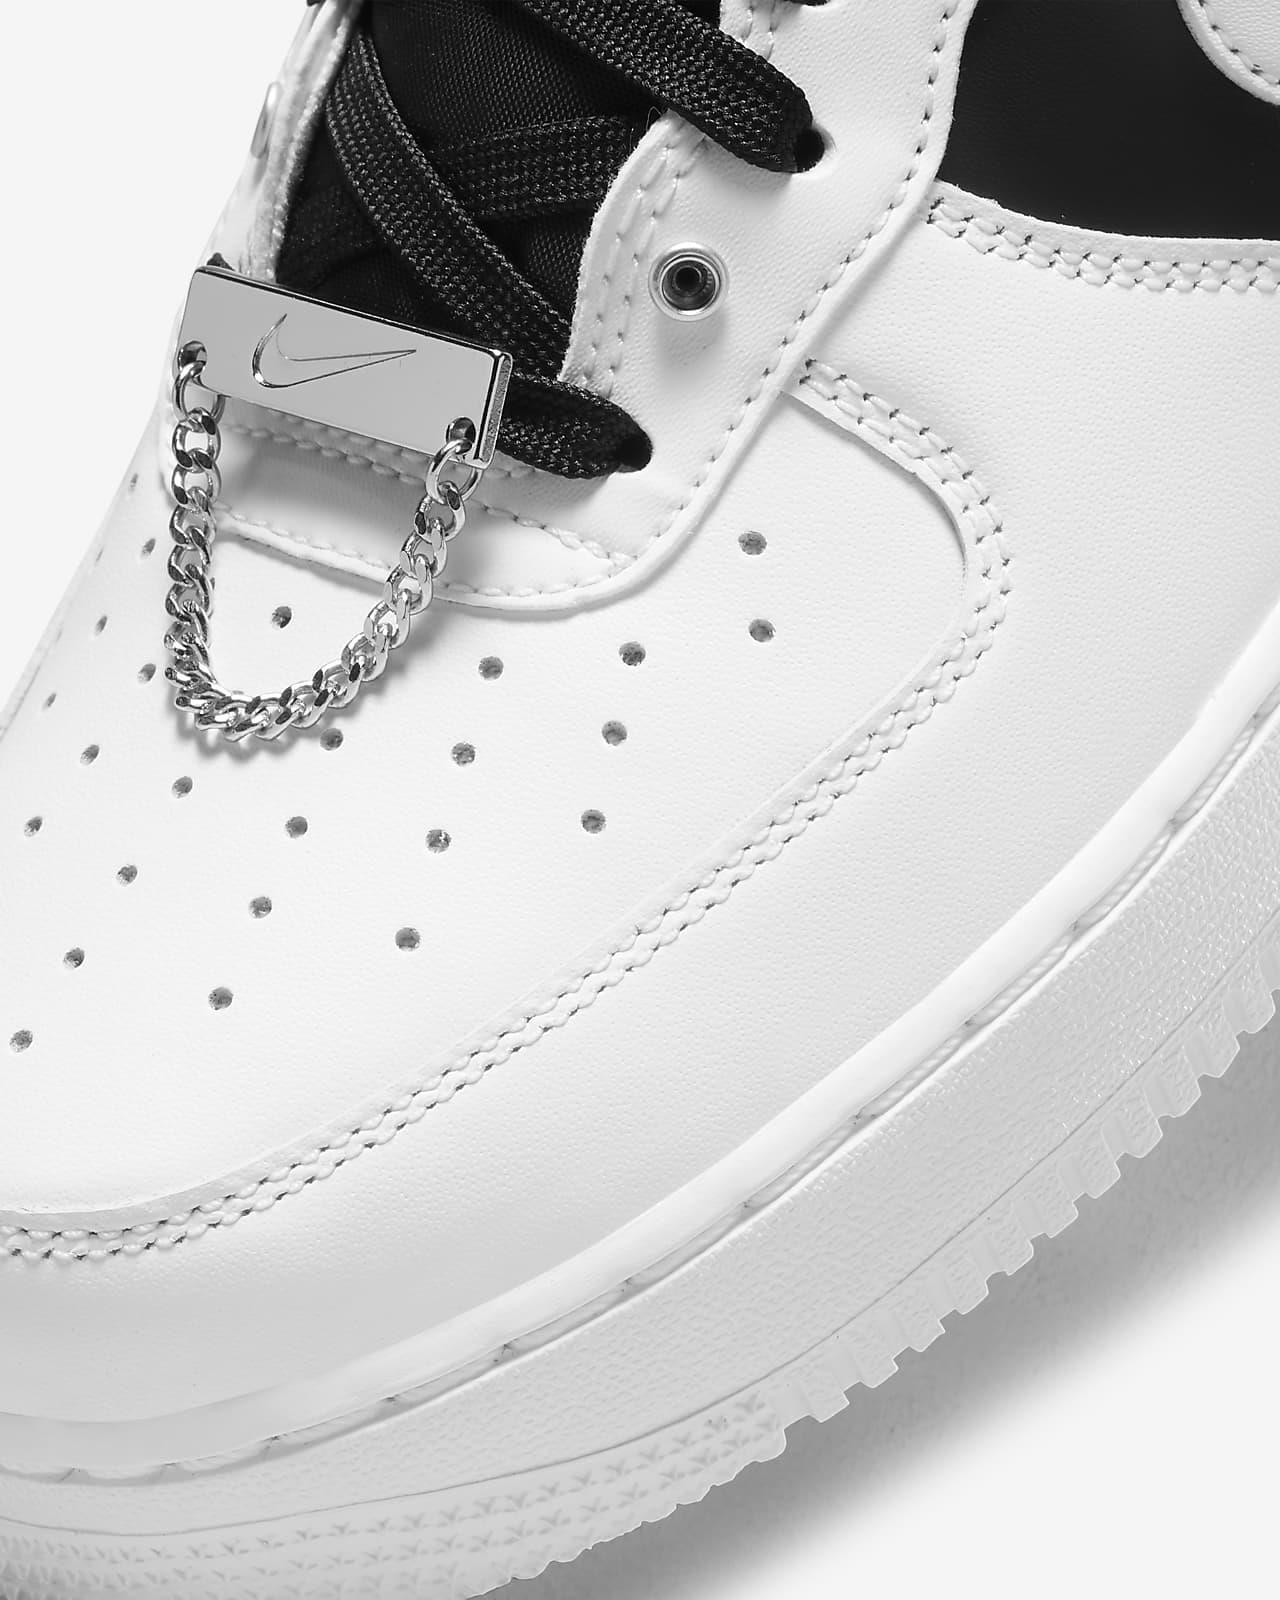 AF1 Destroy Chanel And Dior  Sneakers Custom  Customize your sneakers